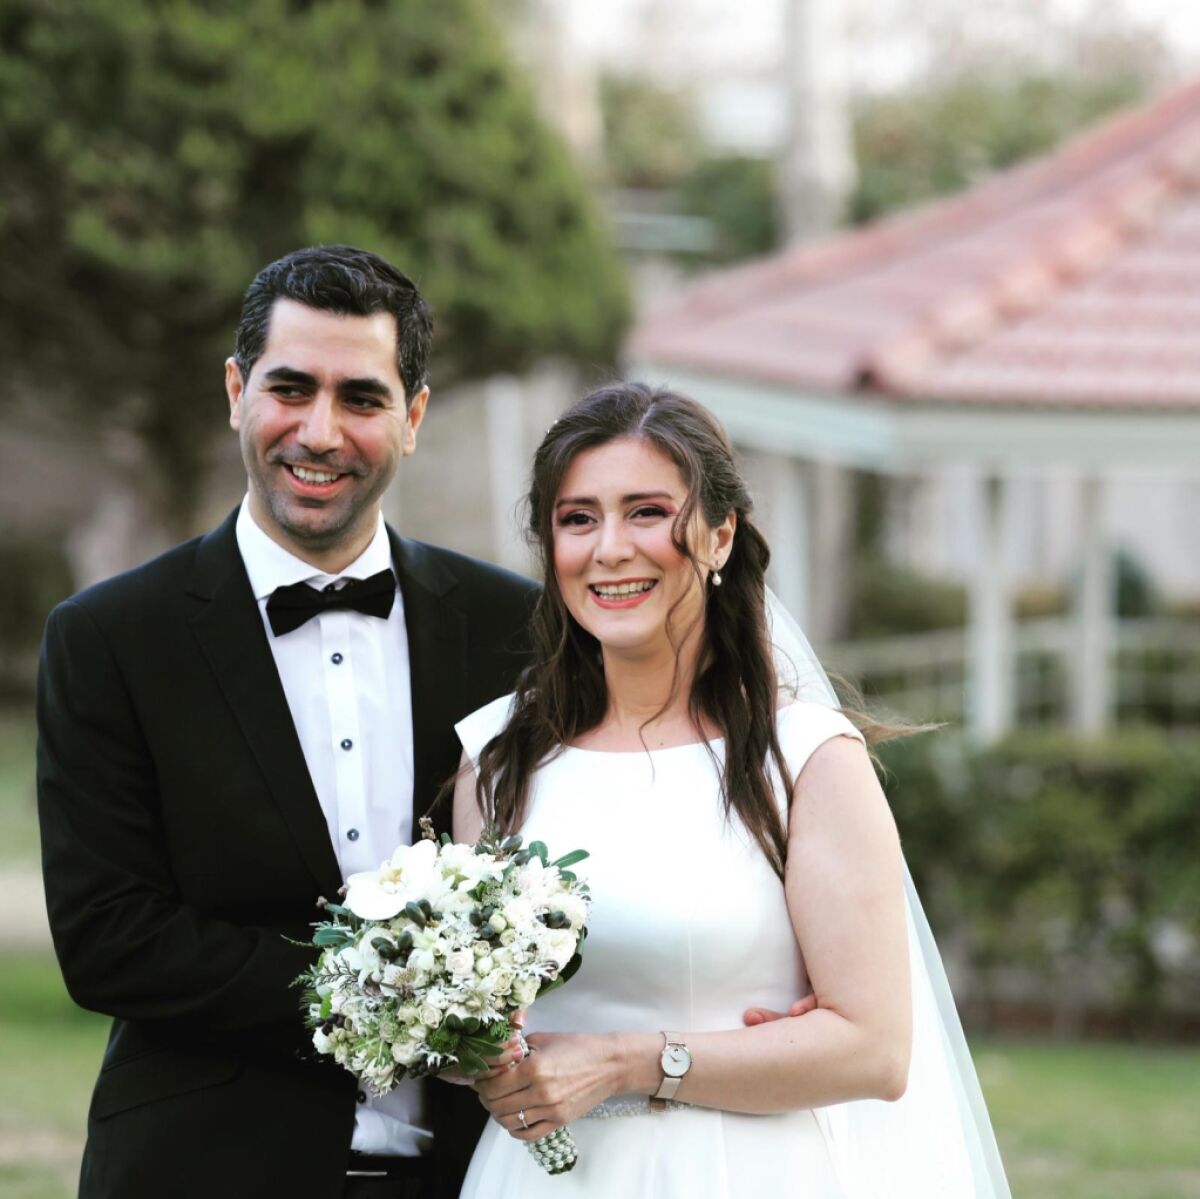 Sara Mamani and Siavash Ghafouri-Azar, engineers who graduated from Concordia University, died in the Jan. 8, 2020, Ukrainian jetliner crash in Iran. They had just celebrated their wedding and were on their way back to Canada.